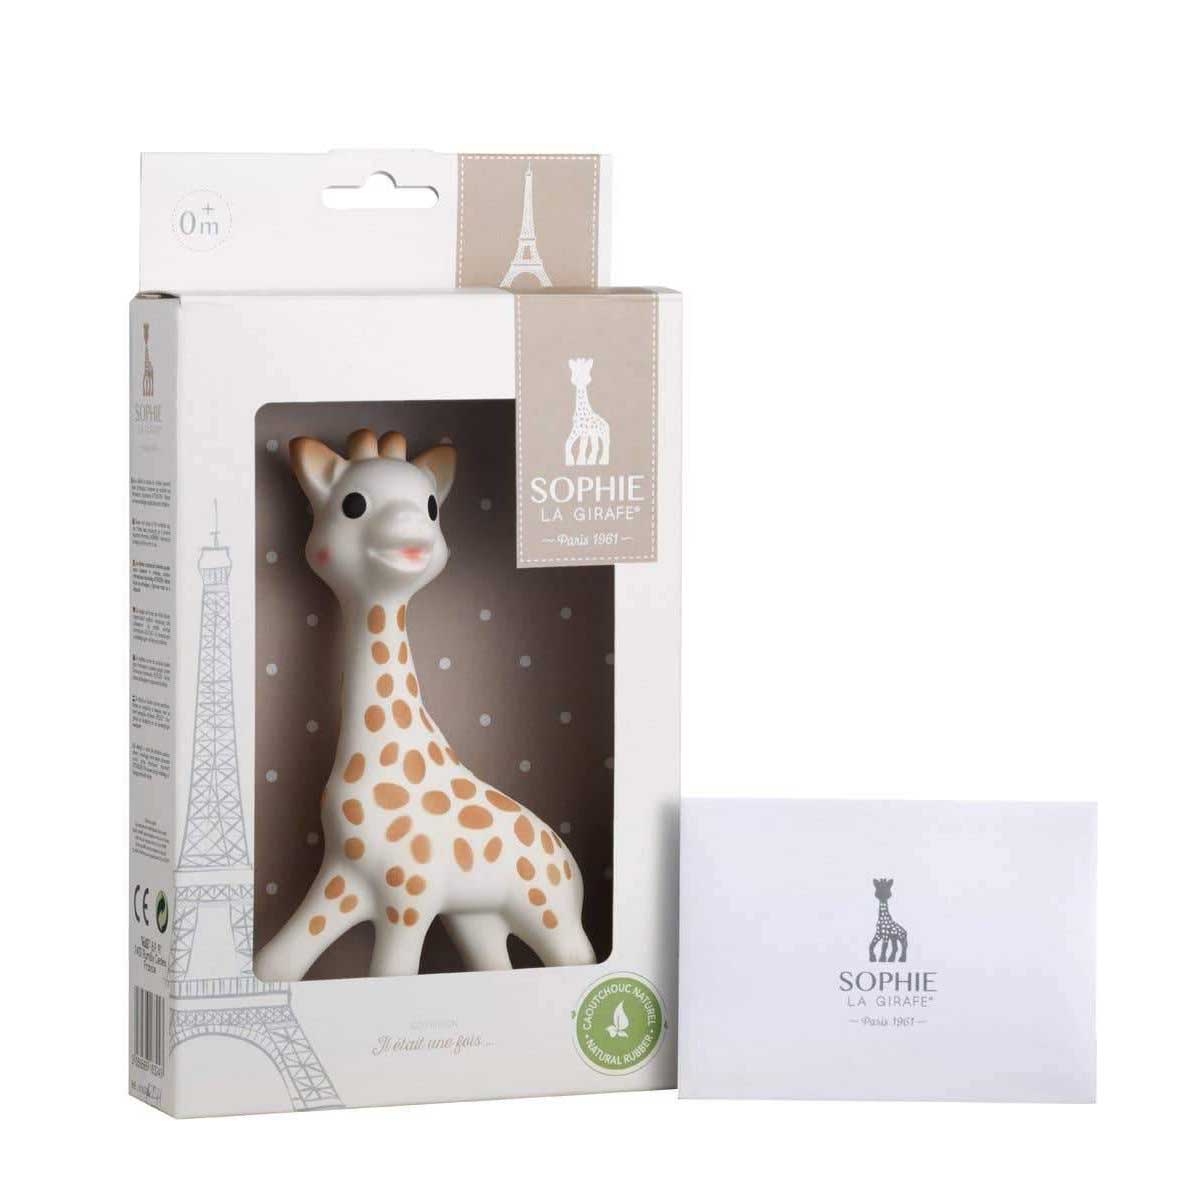 Sophie La Girafe  White Box Classic Baby Teether - SOUTH HOUS.